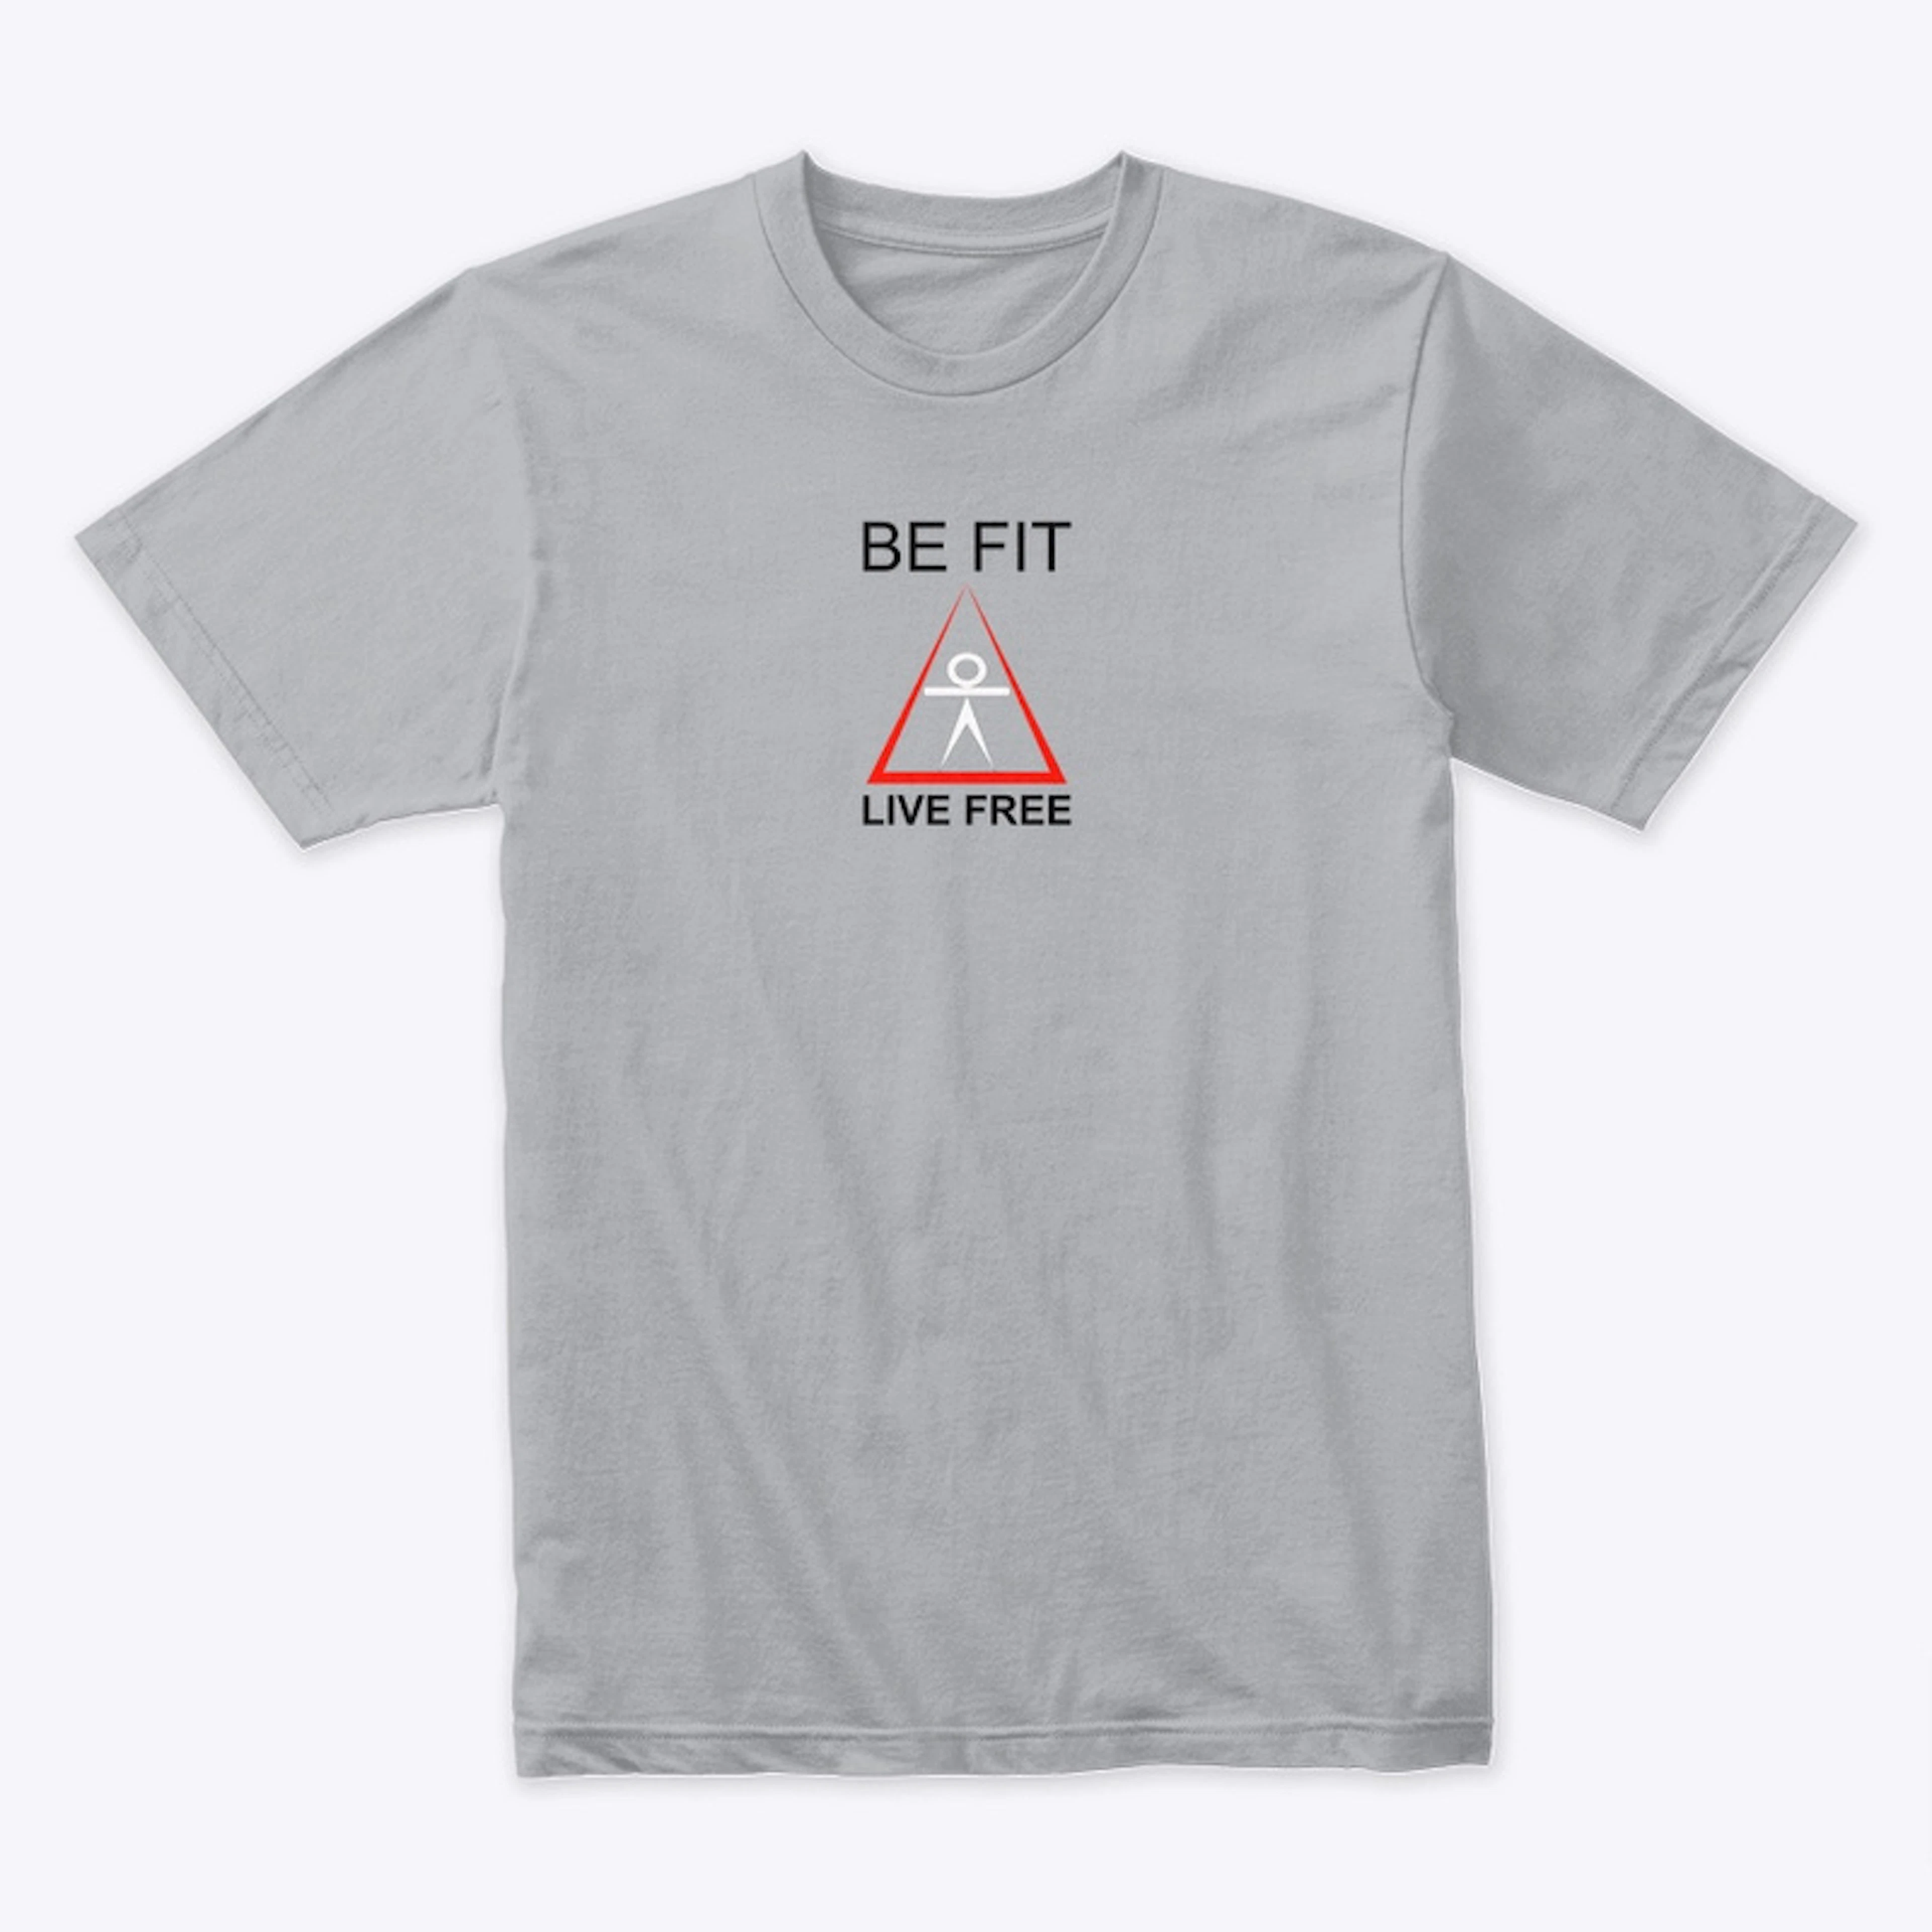 Be Fit Live Free Tee